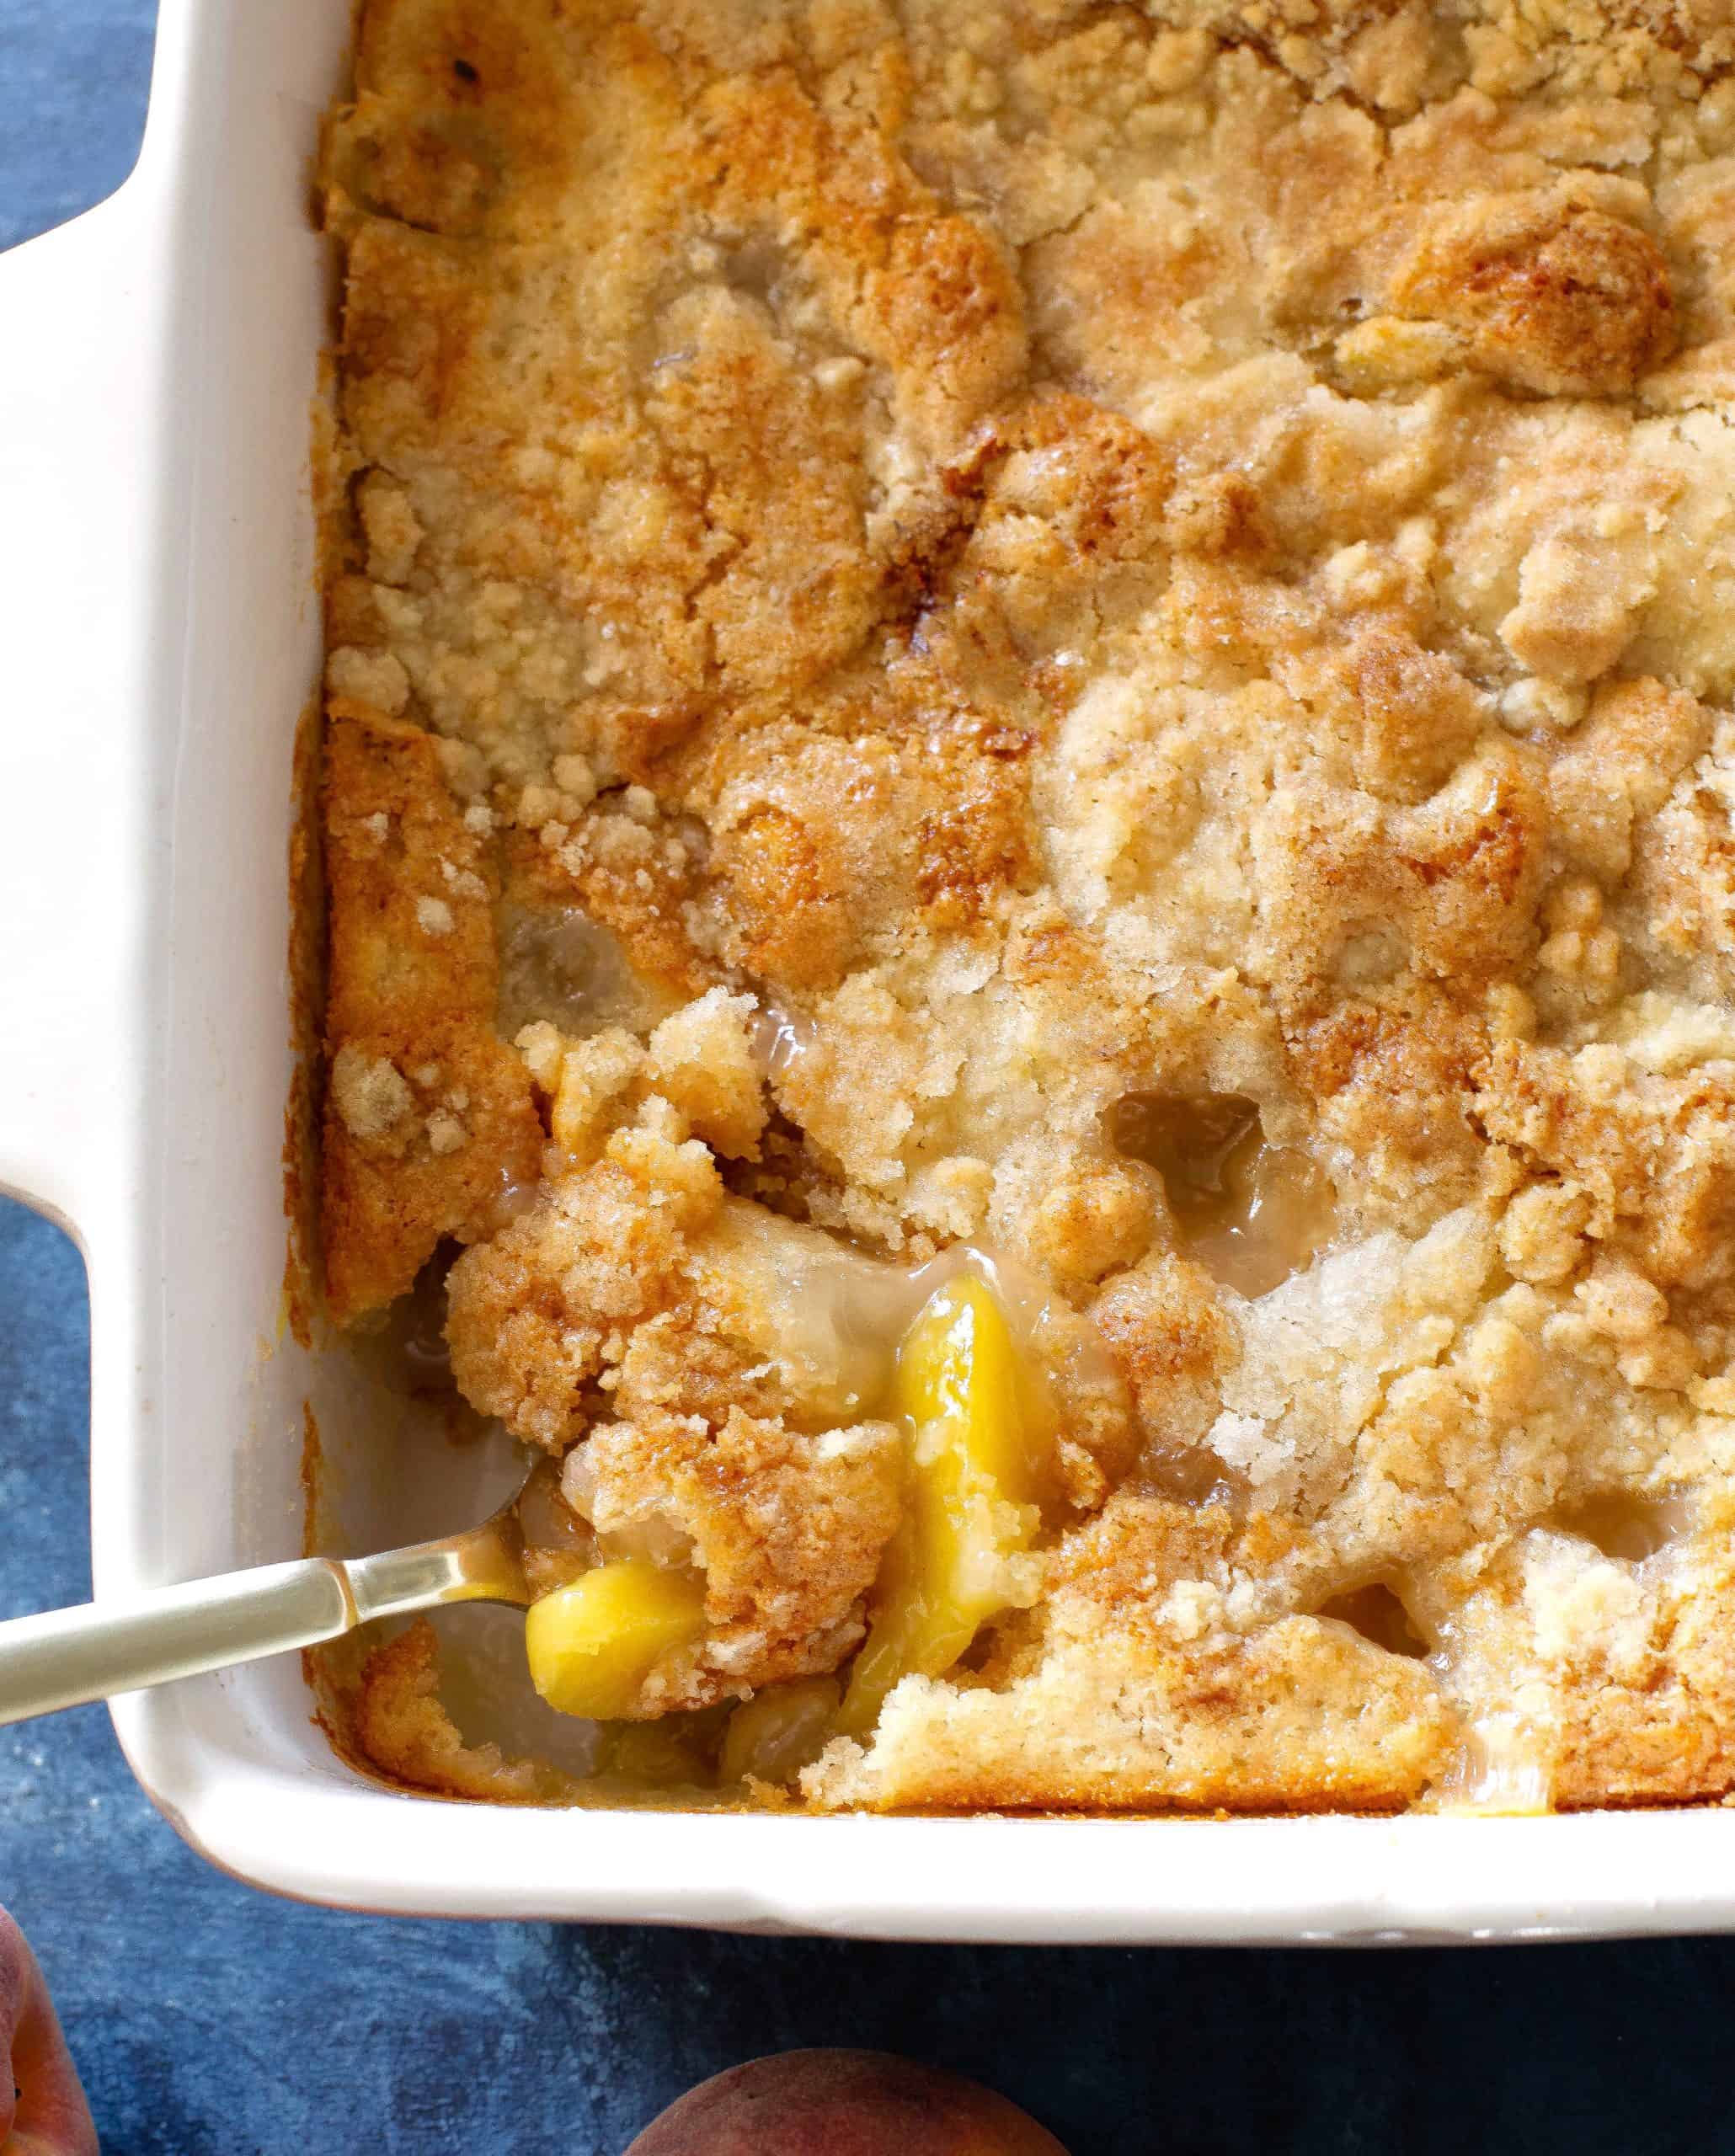 https://www.the-girl-who-ate-everything.com/wp-content/uploads/2013/06/peach-cobbler-16-scaled.jpg